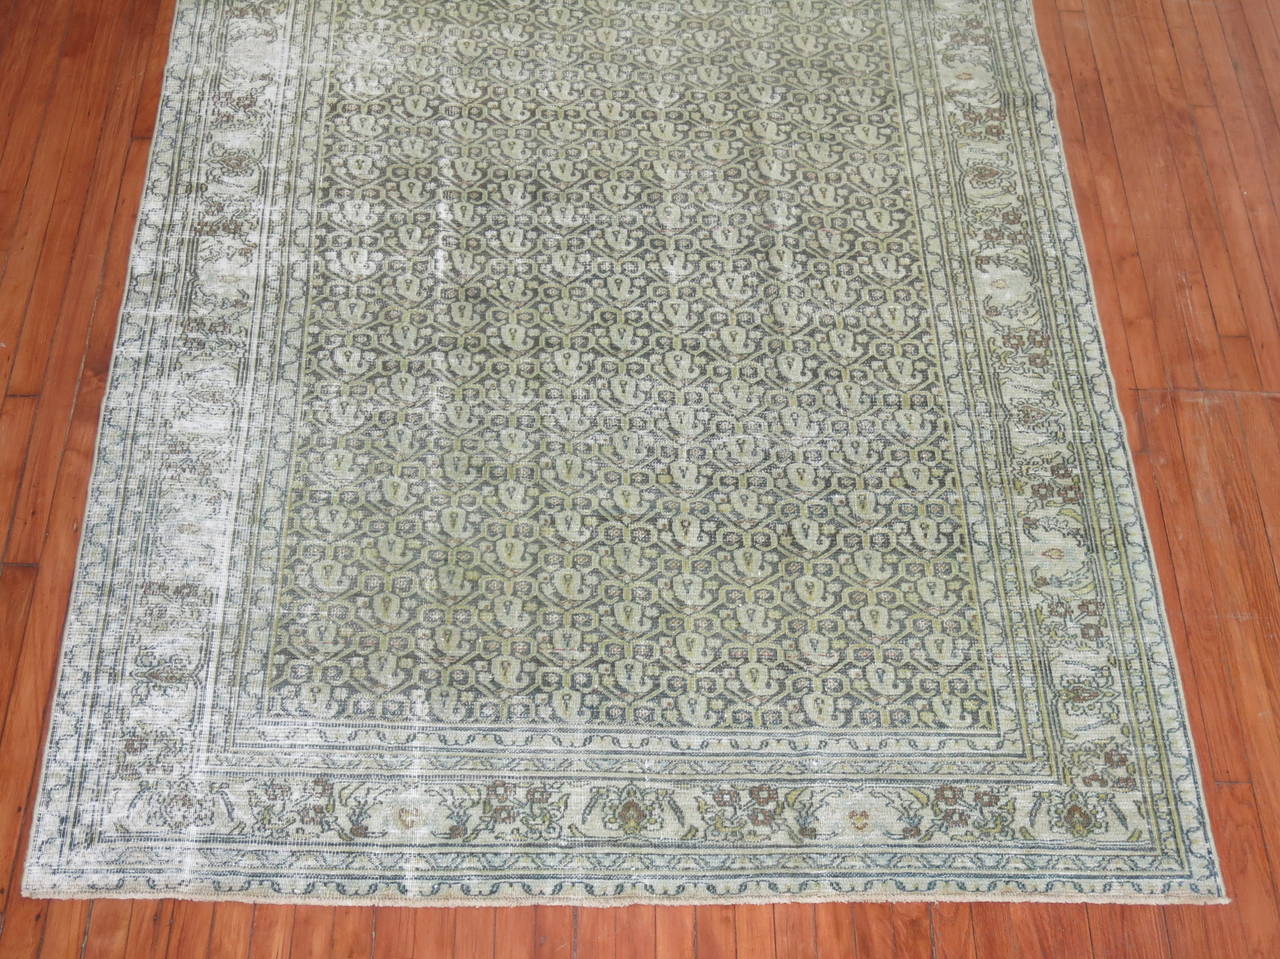 A beautifully distressed early 20th century gallery rug.